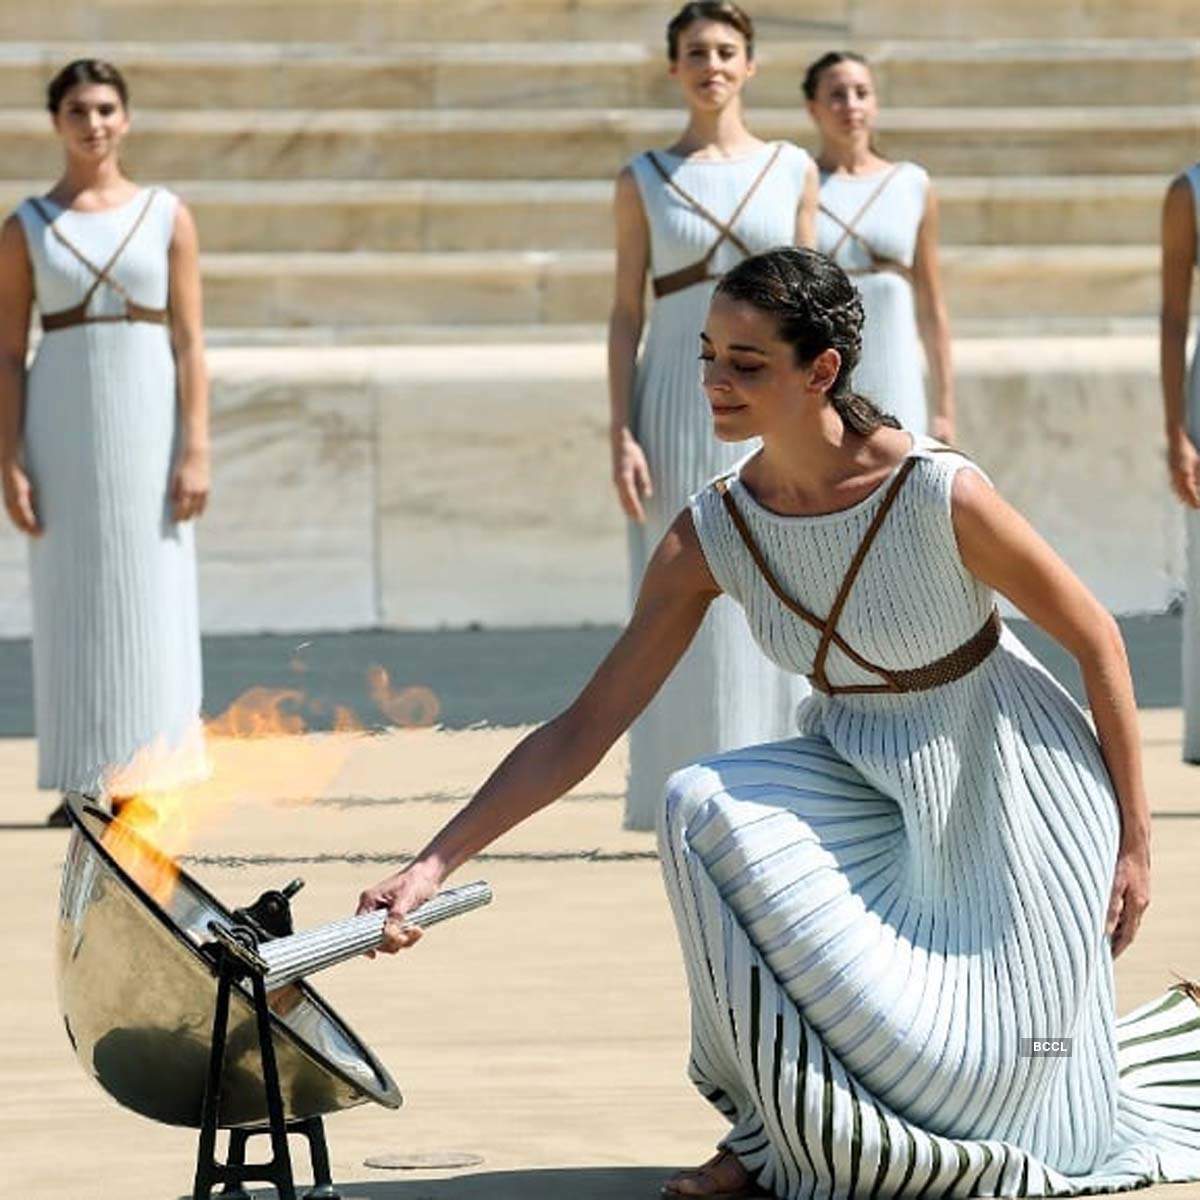 These pictures of the Olympic flame-lighting ceremony will pacify you ...